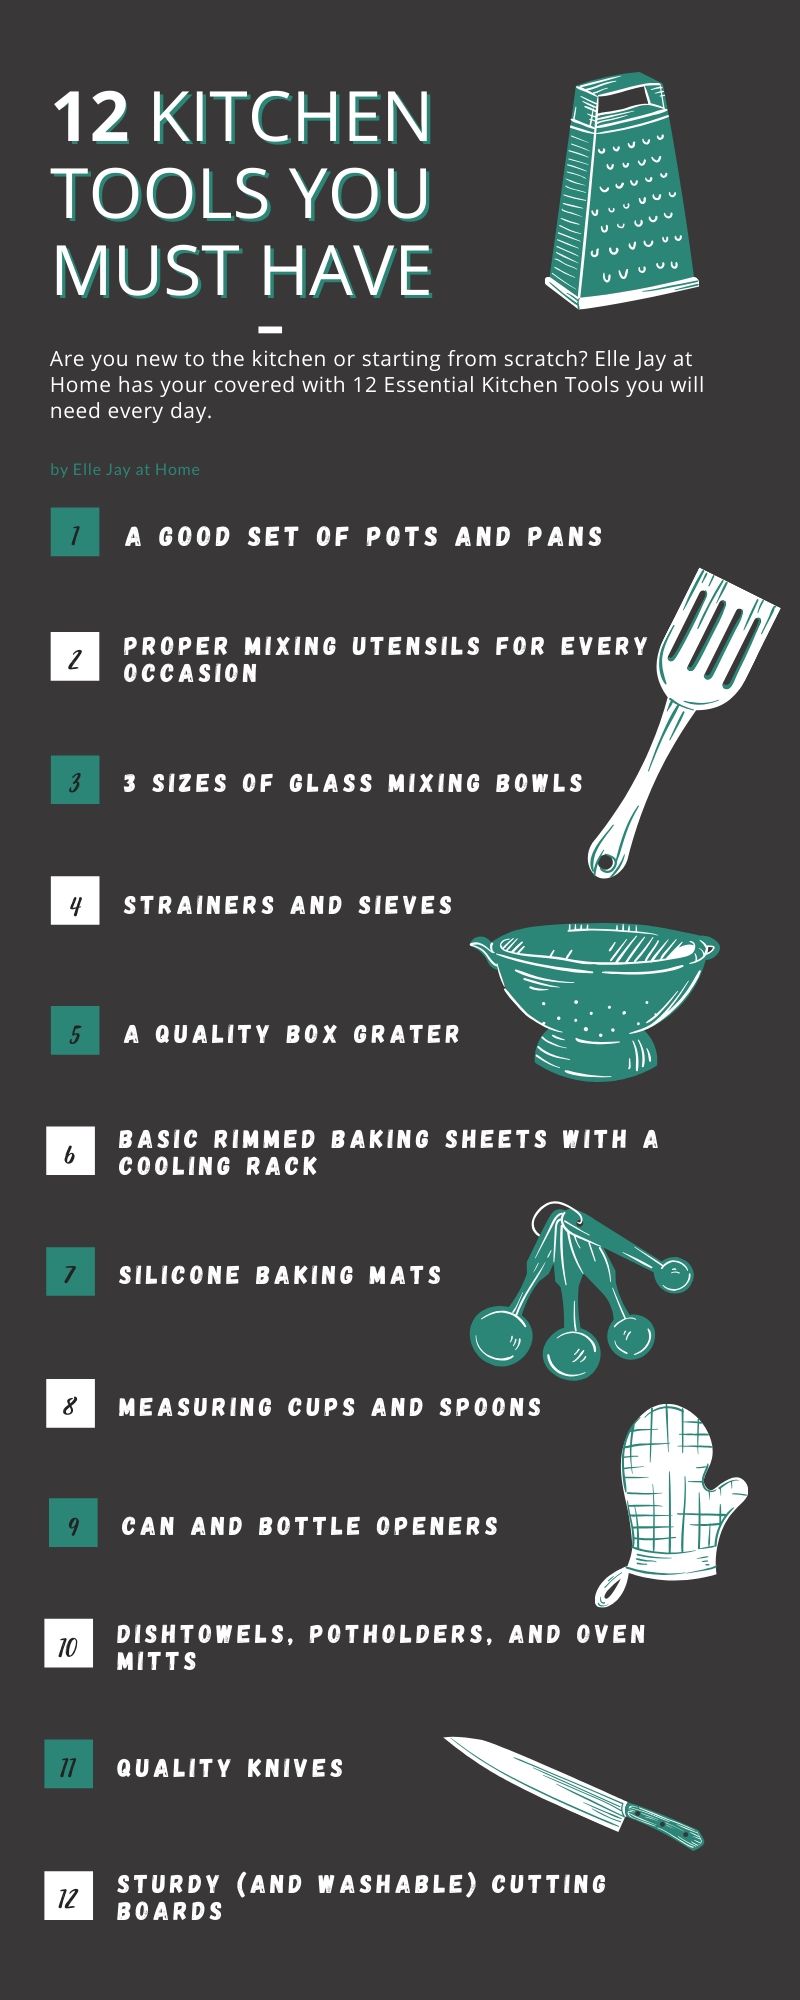 Pin me! Infographic by Elle Jay at Home, 12 Kitchen Tools You Must Have